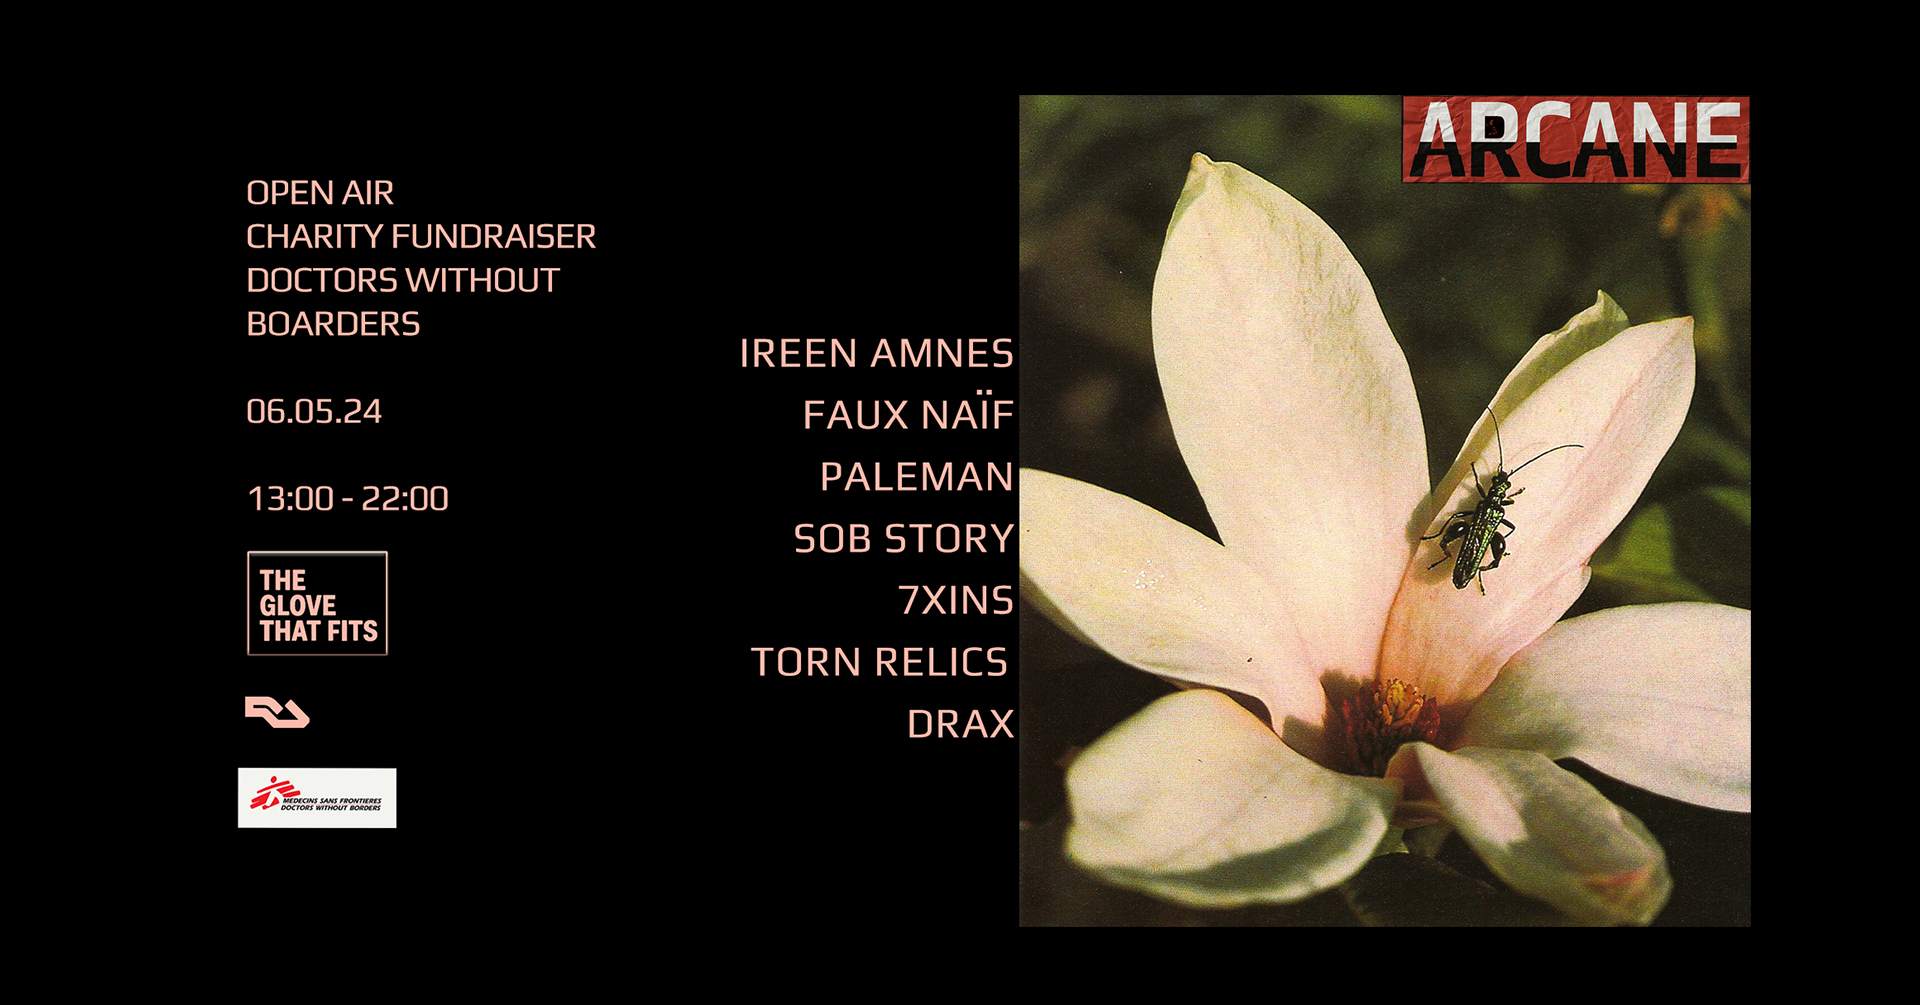 Arcane Open Air Charity Fundraiser: Ireen Amnes, Faux Naïf, Paleman, Sob Story, 7XINS  - フライヤー表